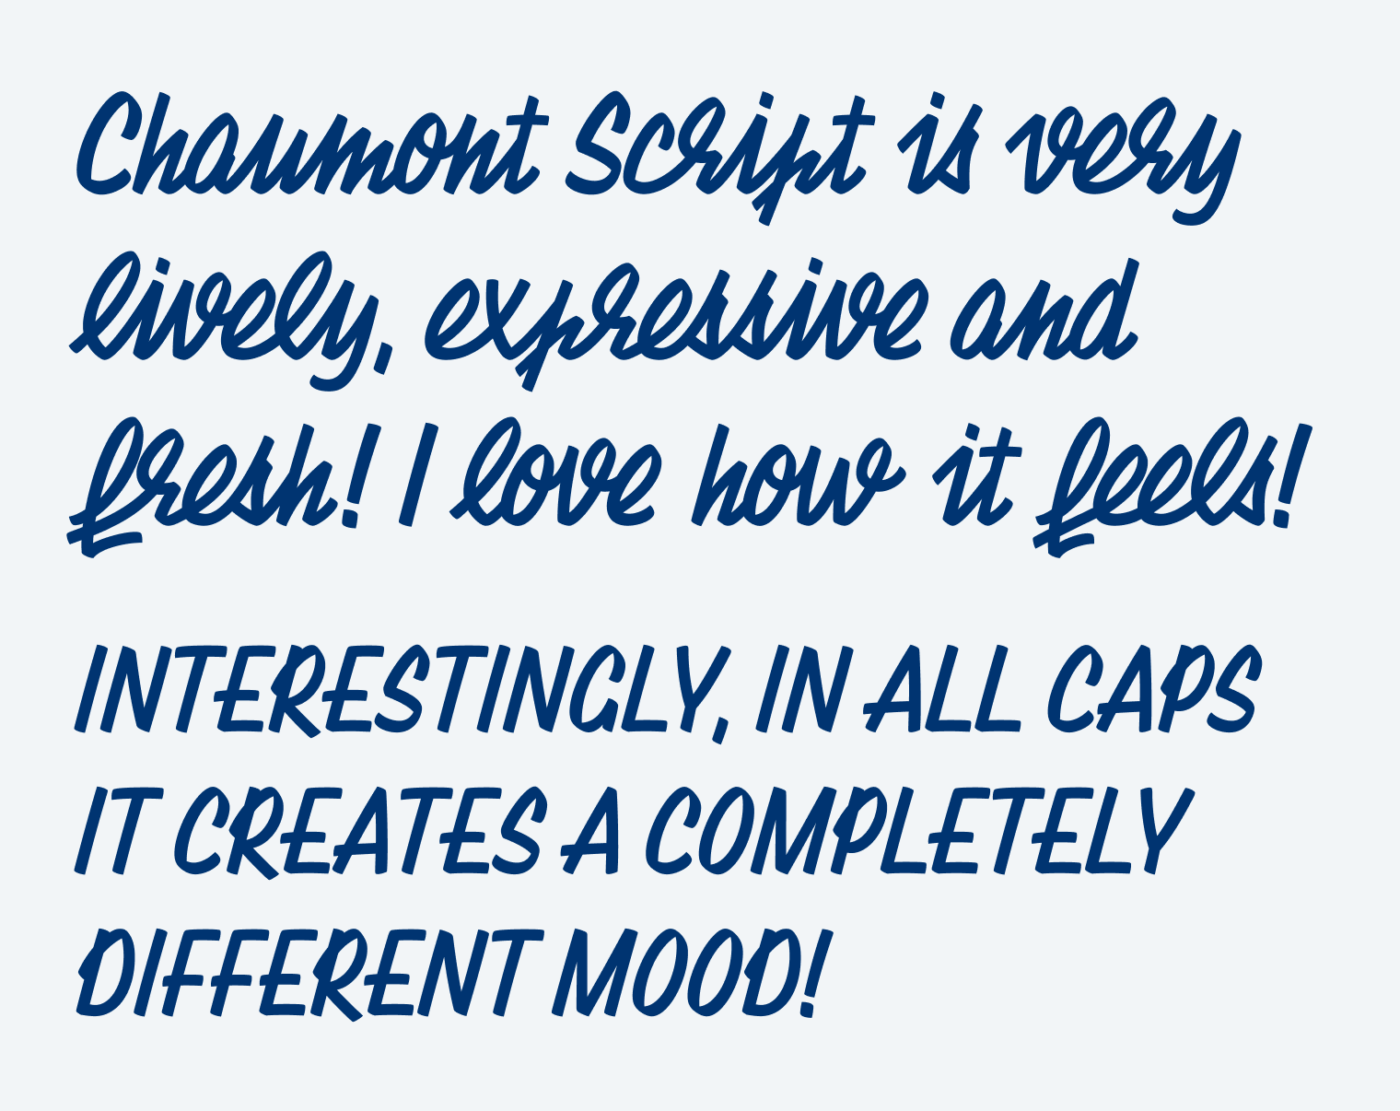 Chaumont Script is very lively, expressive and fresh! I love how it feels! Interestingly, in all caps it creates a completely different mood!